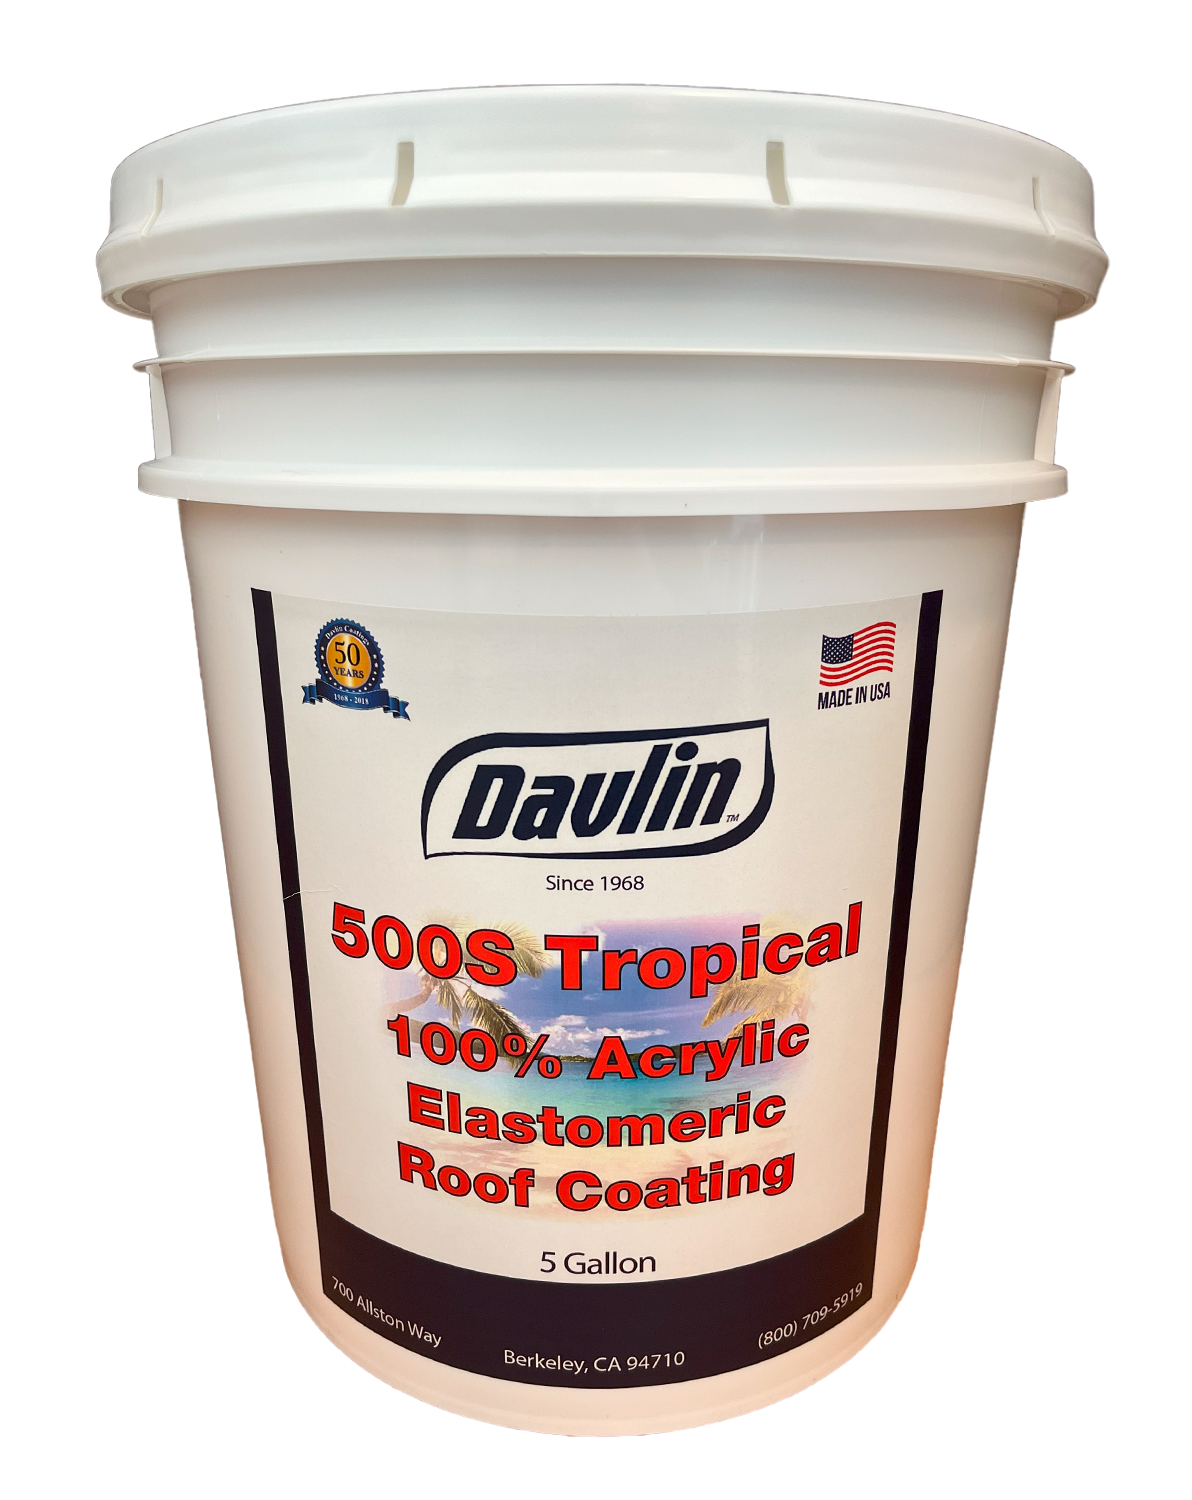 Tropical Roof Coating - Elastomeric Roof Coating - 500S - Free Shipping - Free Sample